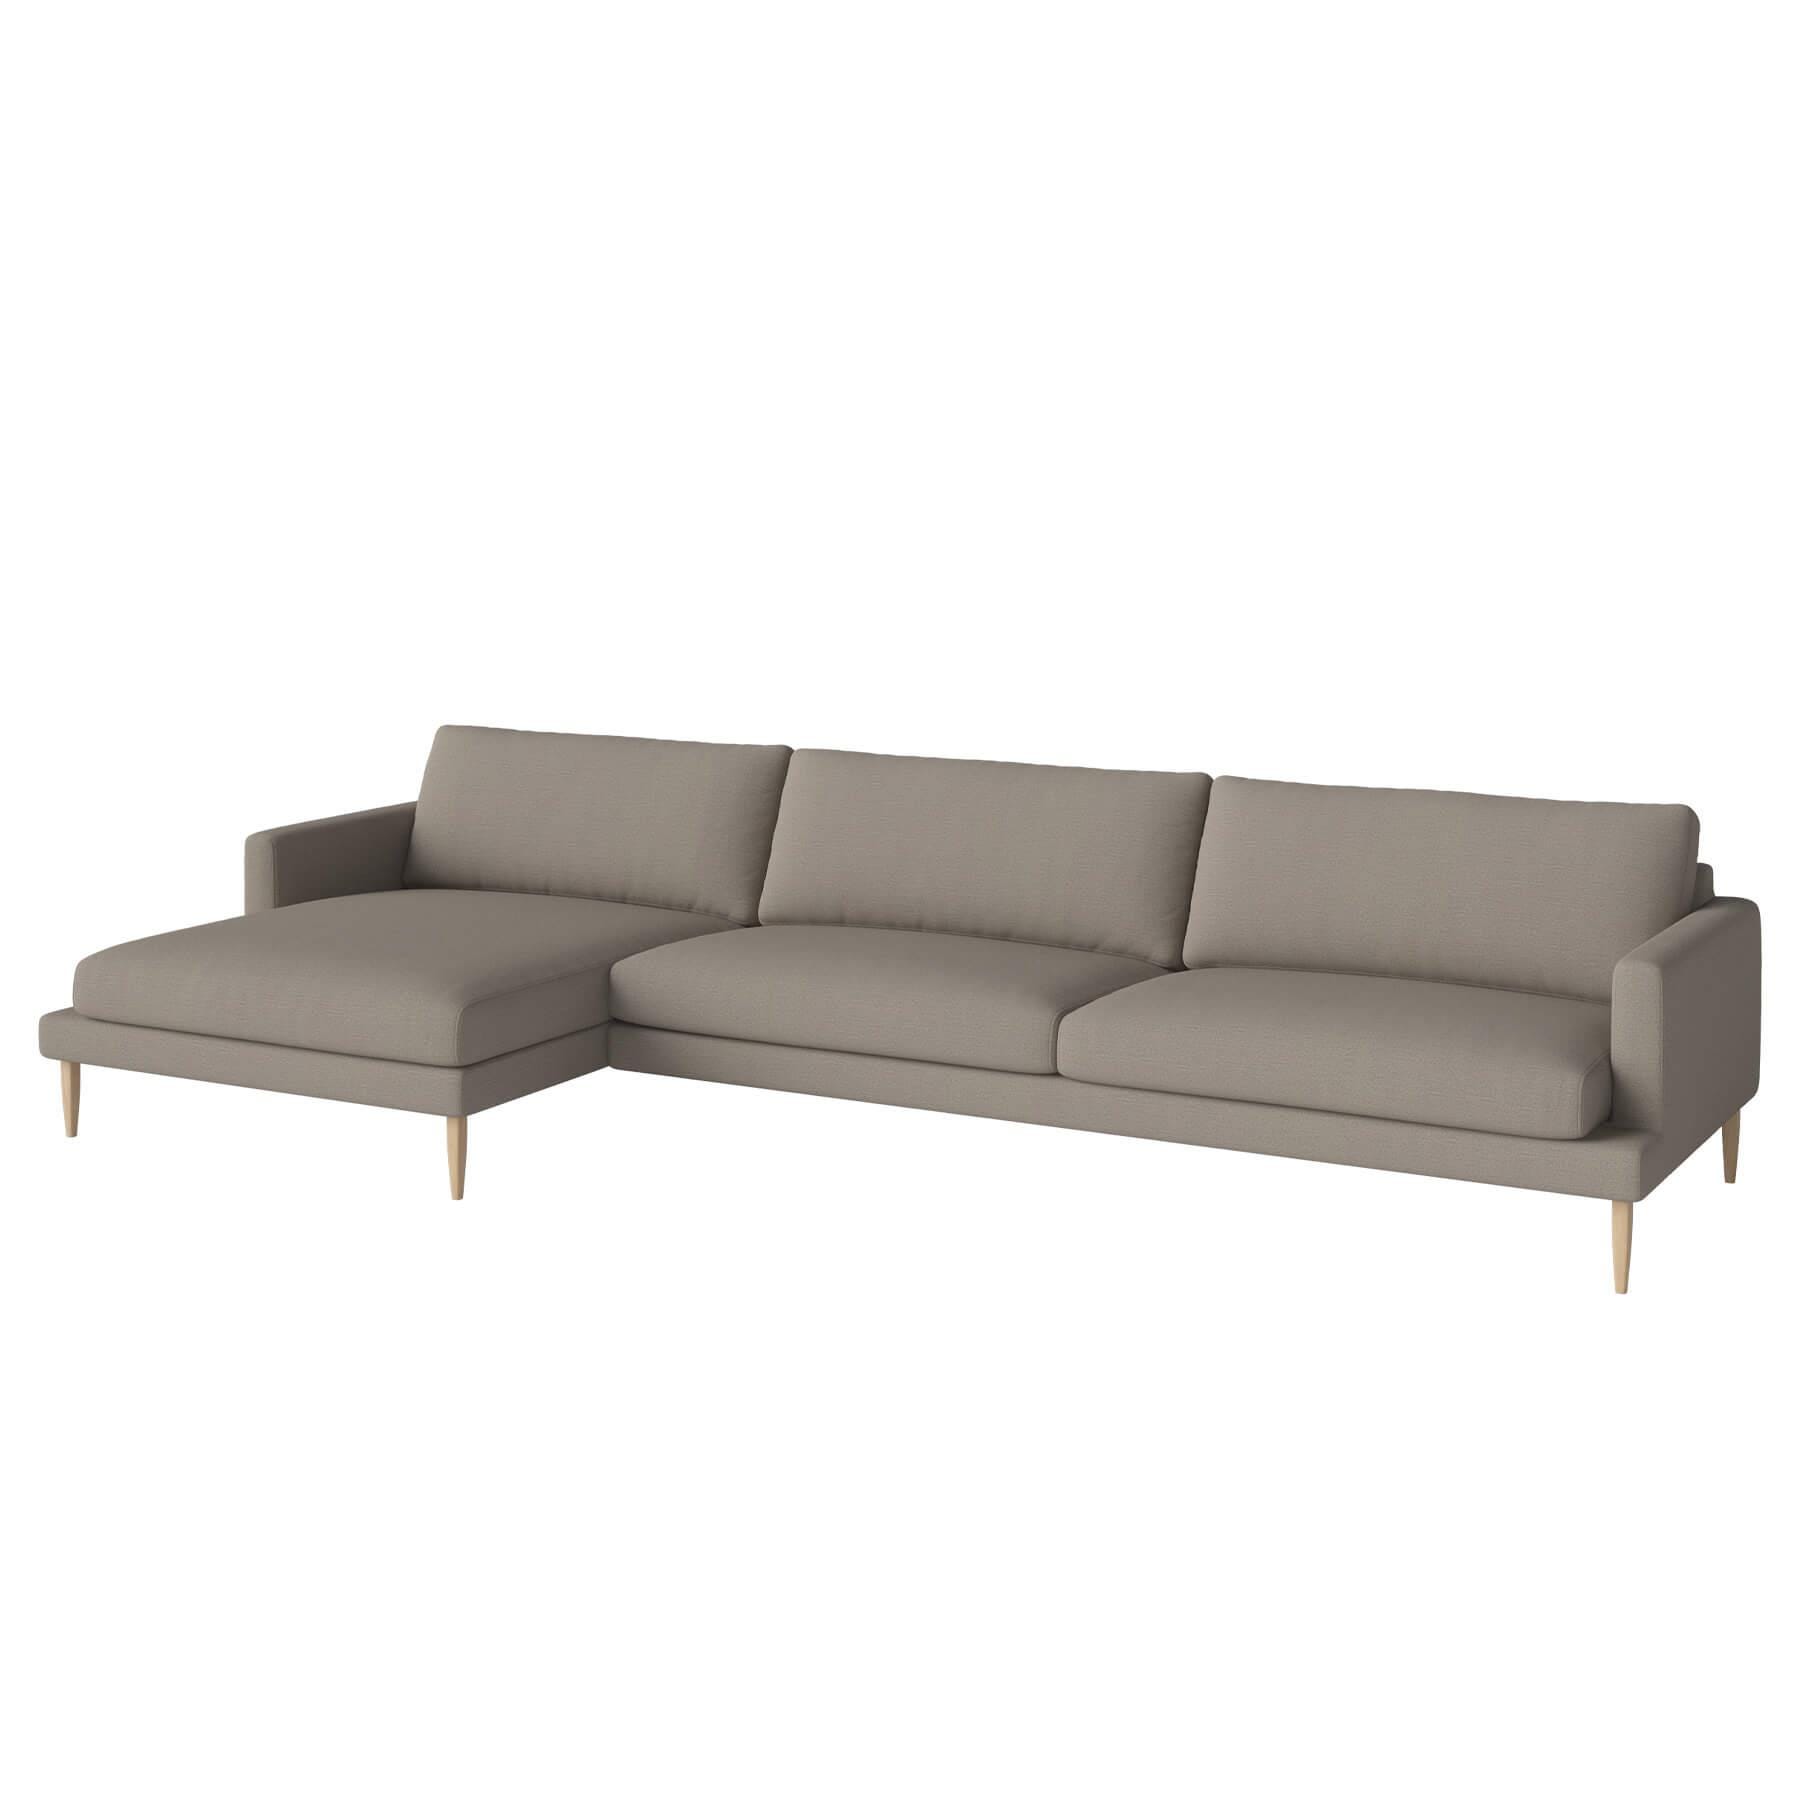 Bolia Veneda Sofa 45 Seater Sofa With Chaise Longue White Oiled Oak Baize Dark Beige Left Brown Designer Furniture From Holloways Of Ludlow